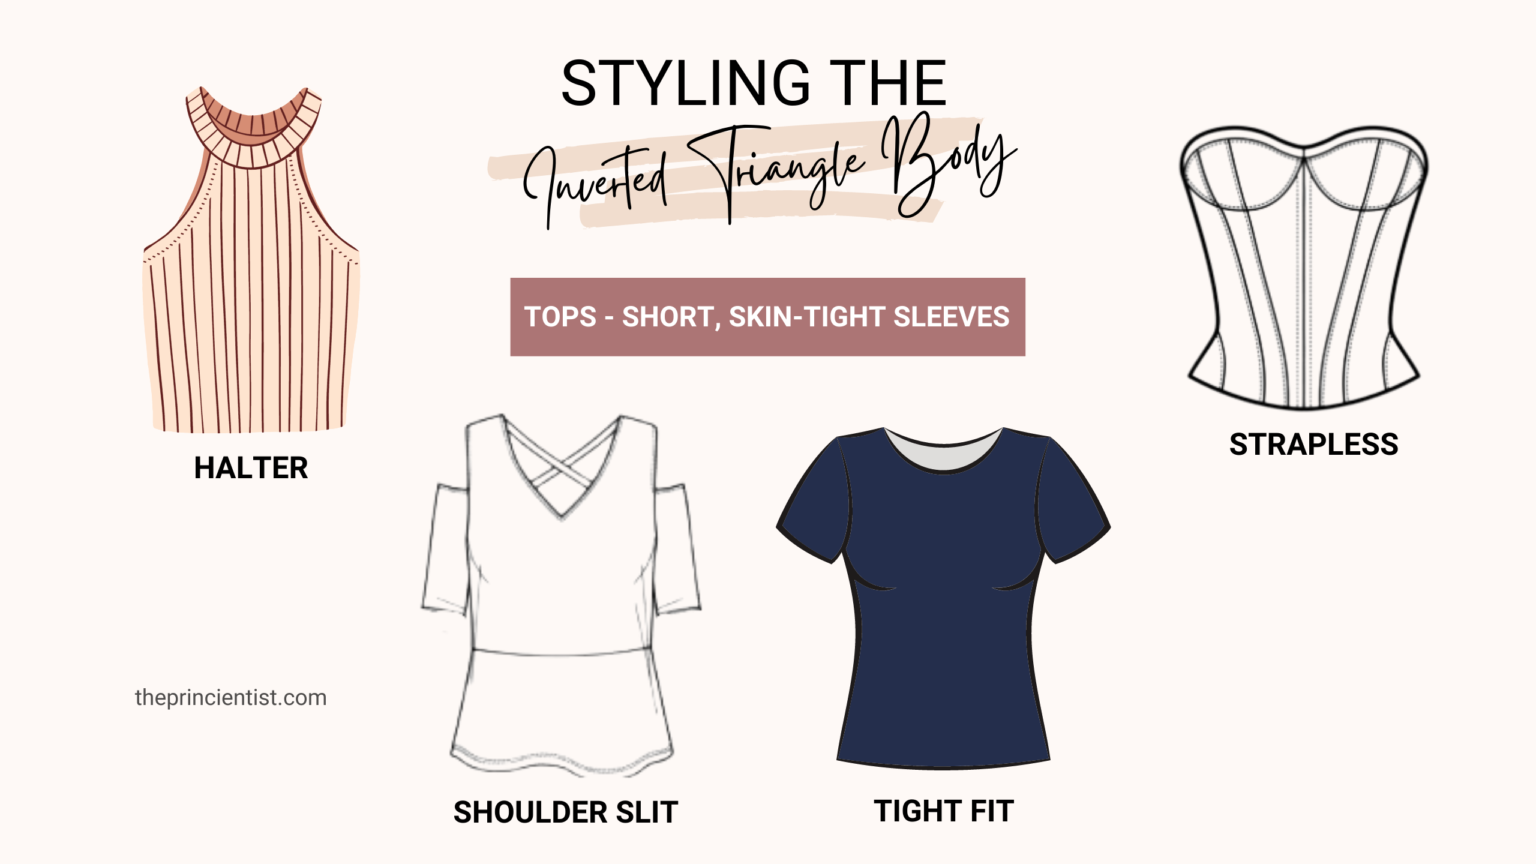 How To Dress The Inverted Triangle Body Shape – Complete Guide